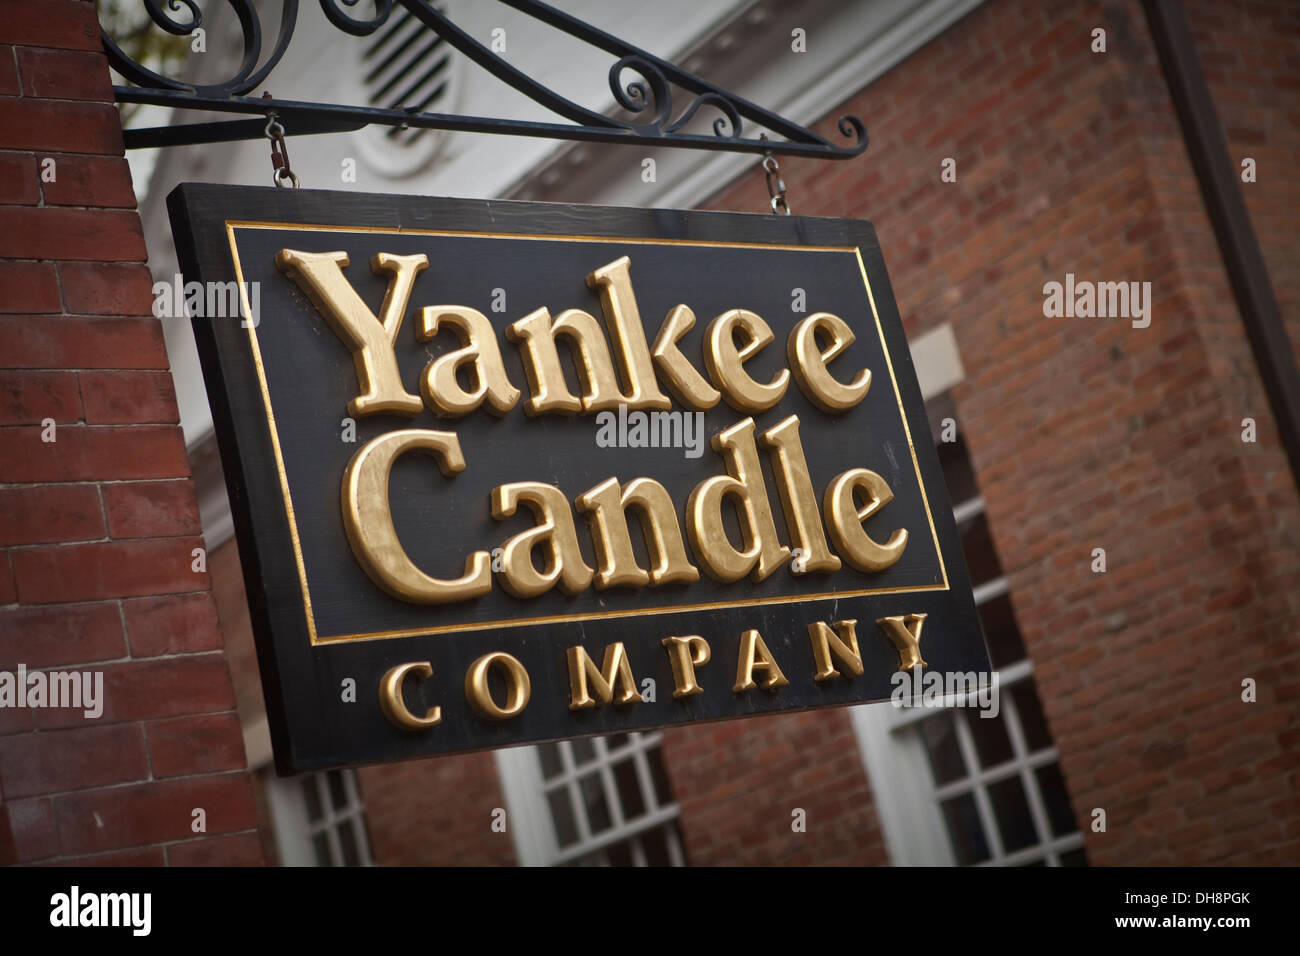 A Yankee Candle Company store is pictured in Stockbridge, Massachusetts Stock Photo